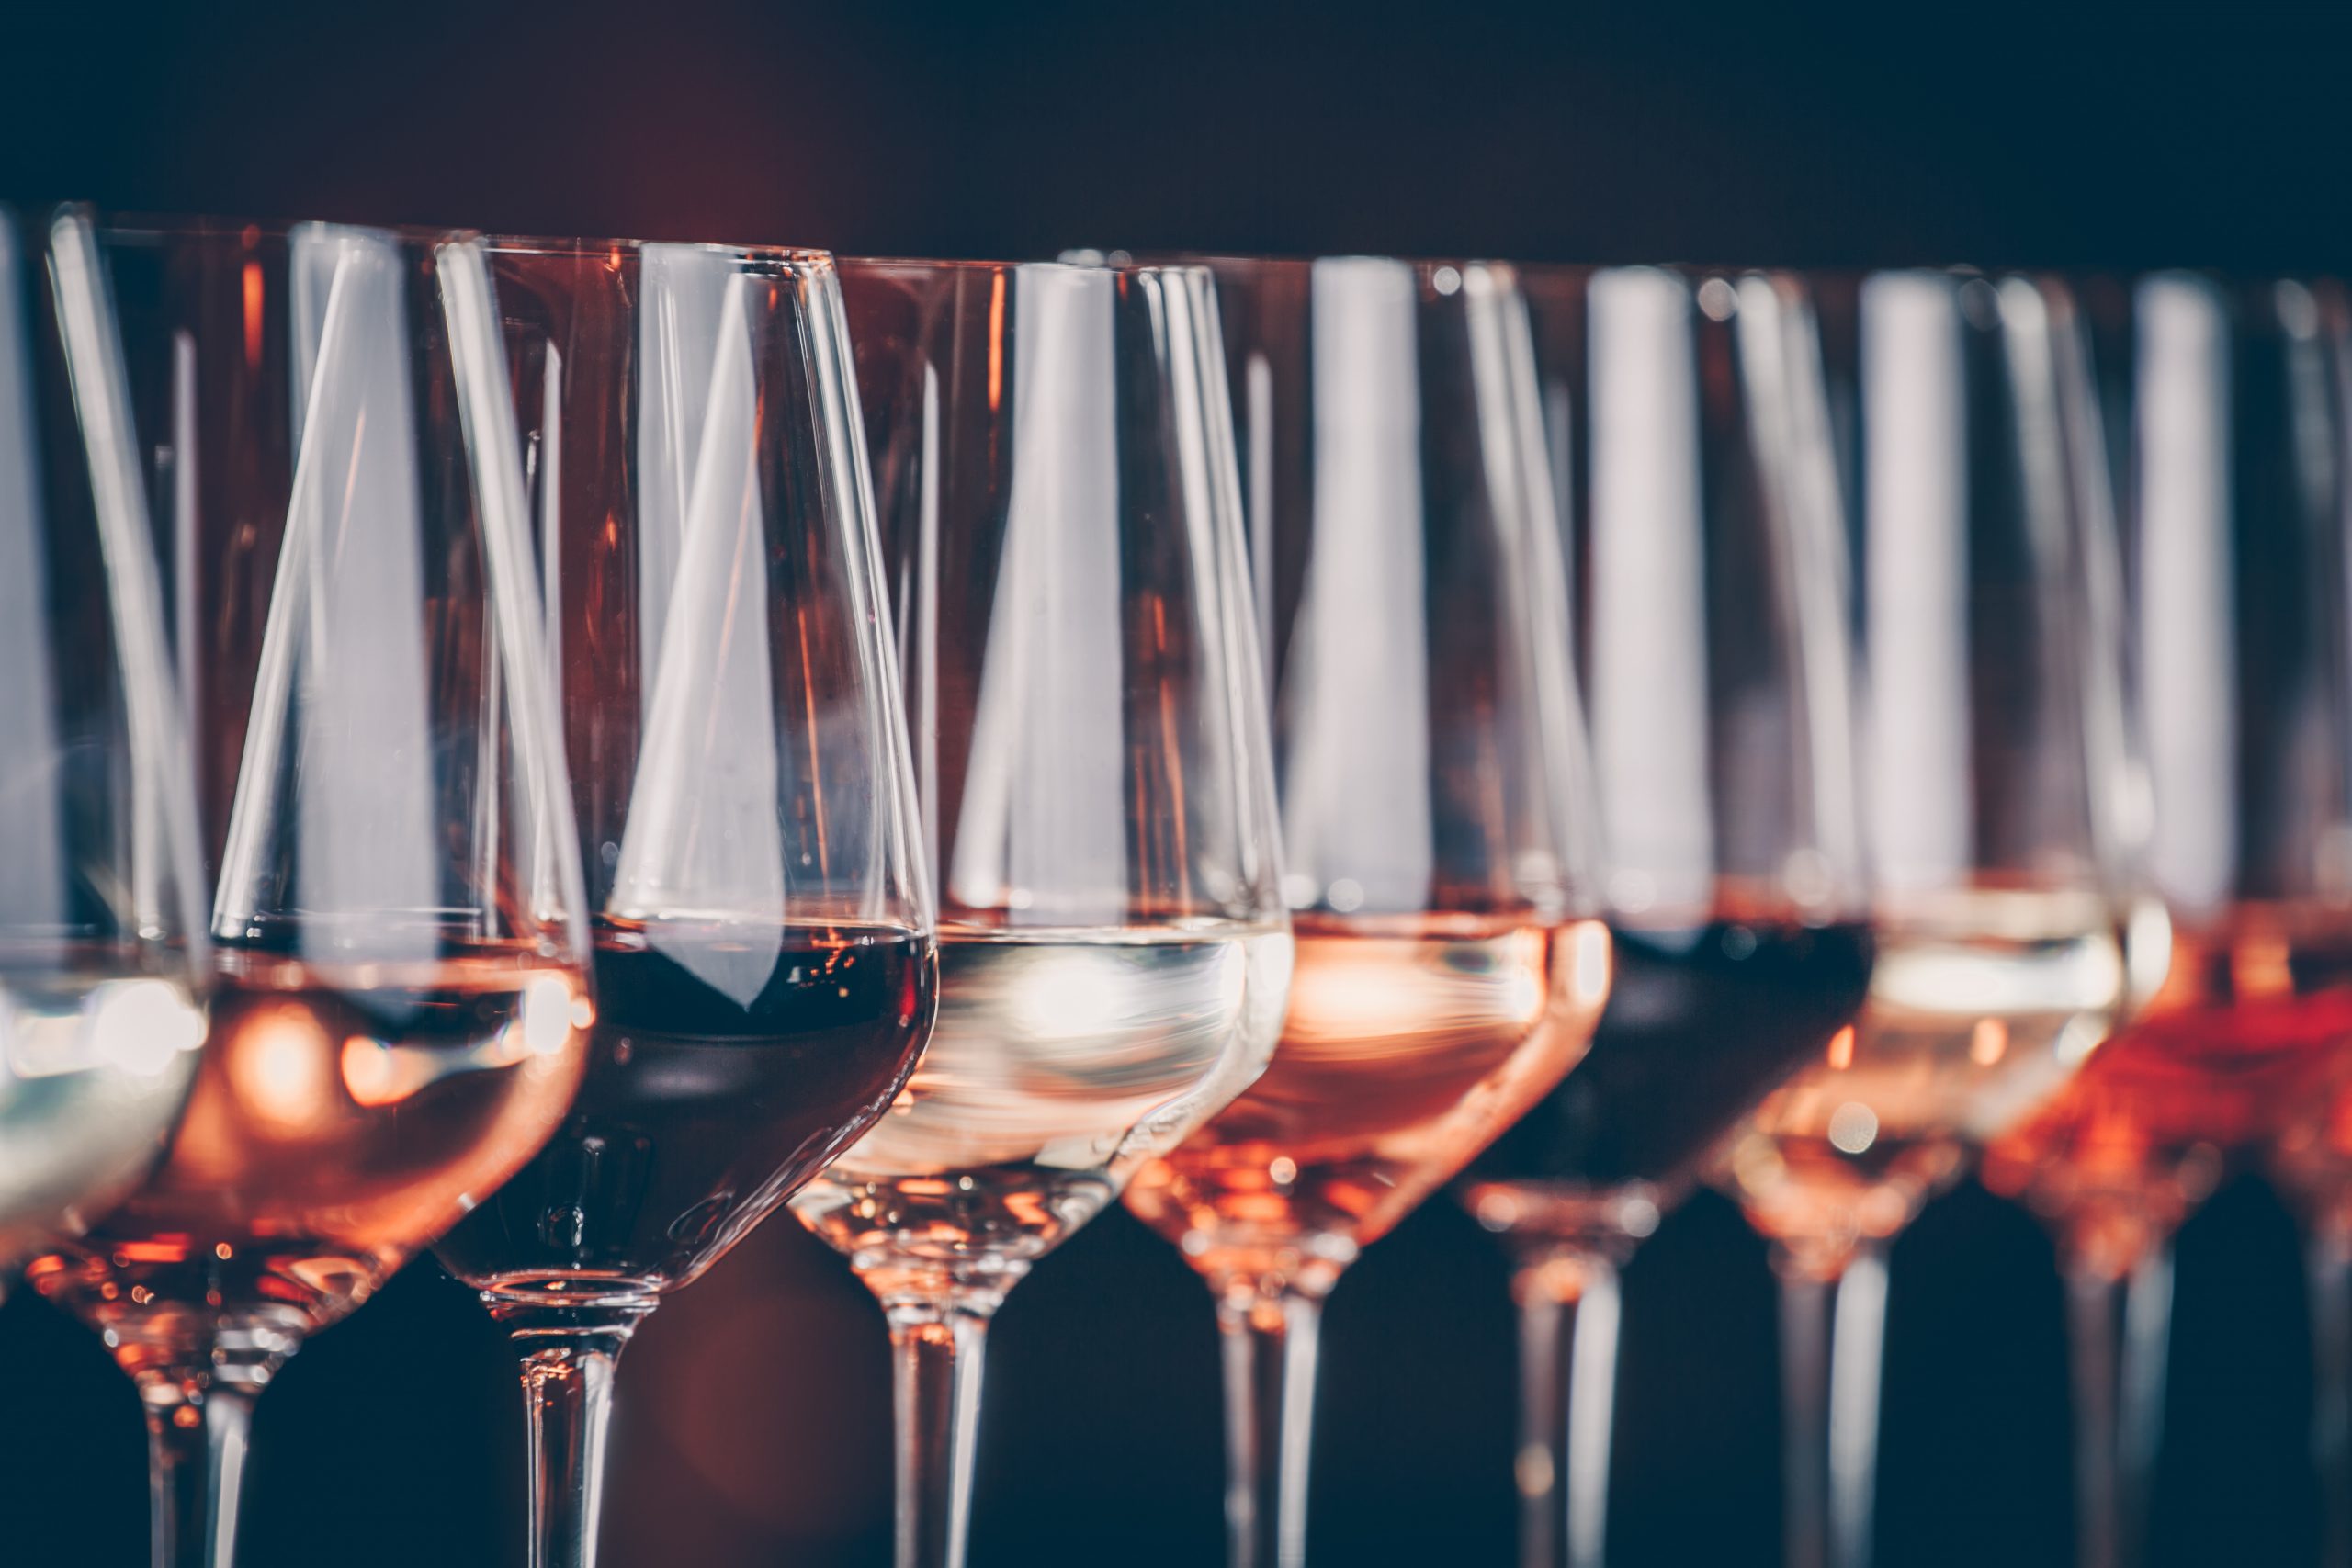 National Drink Wine Day Celebrated in Canada on February 18th